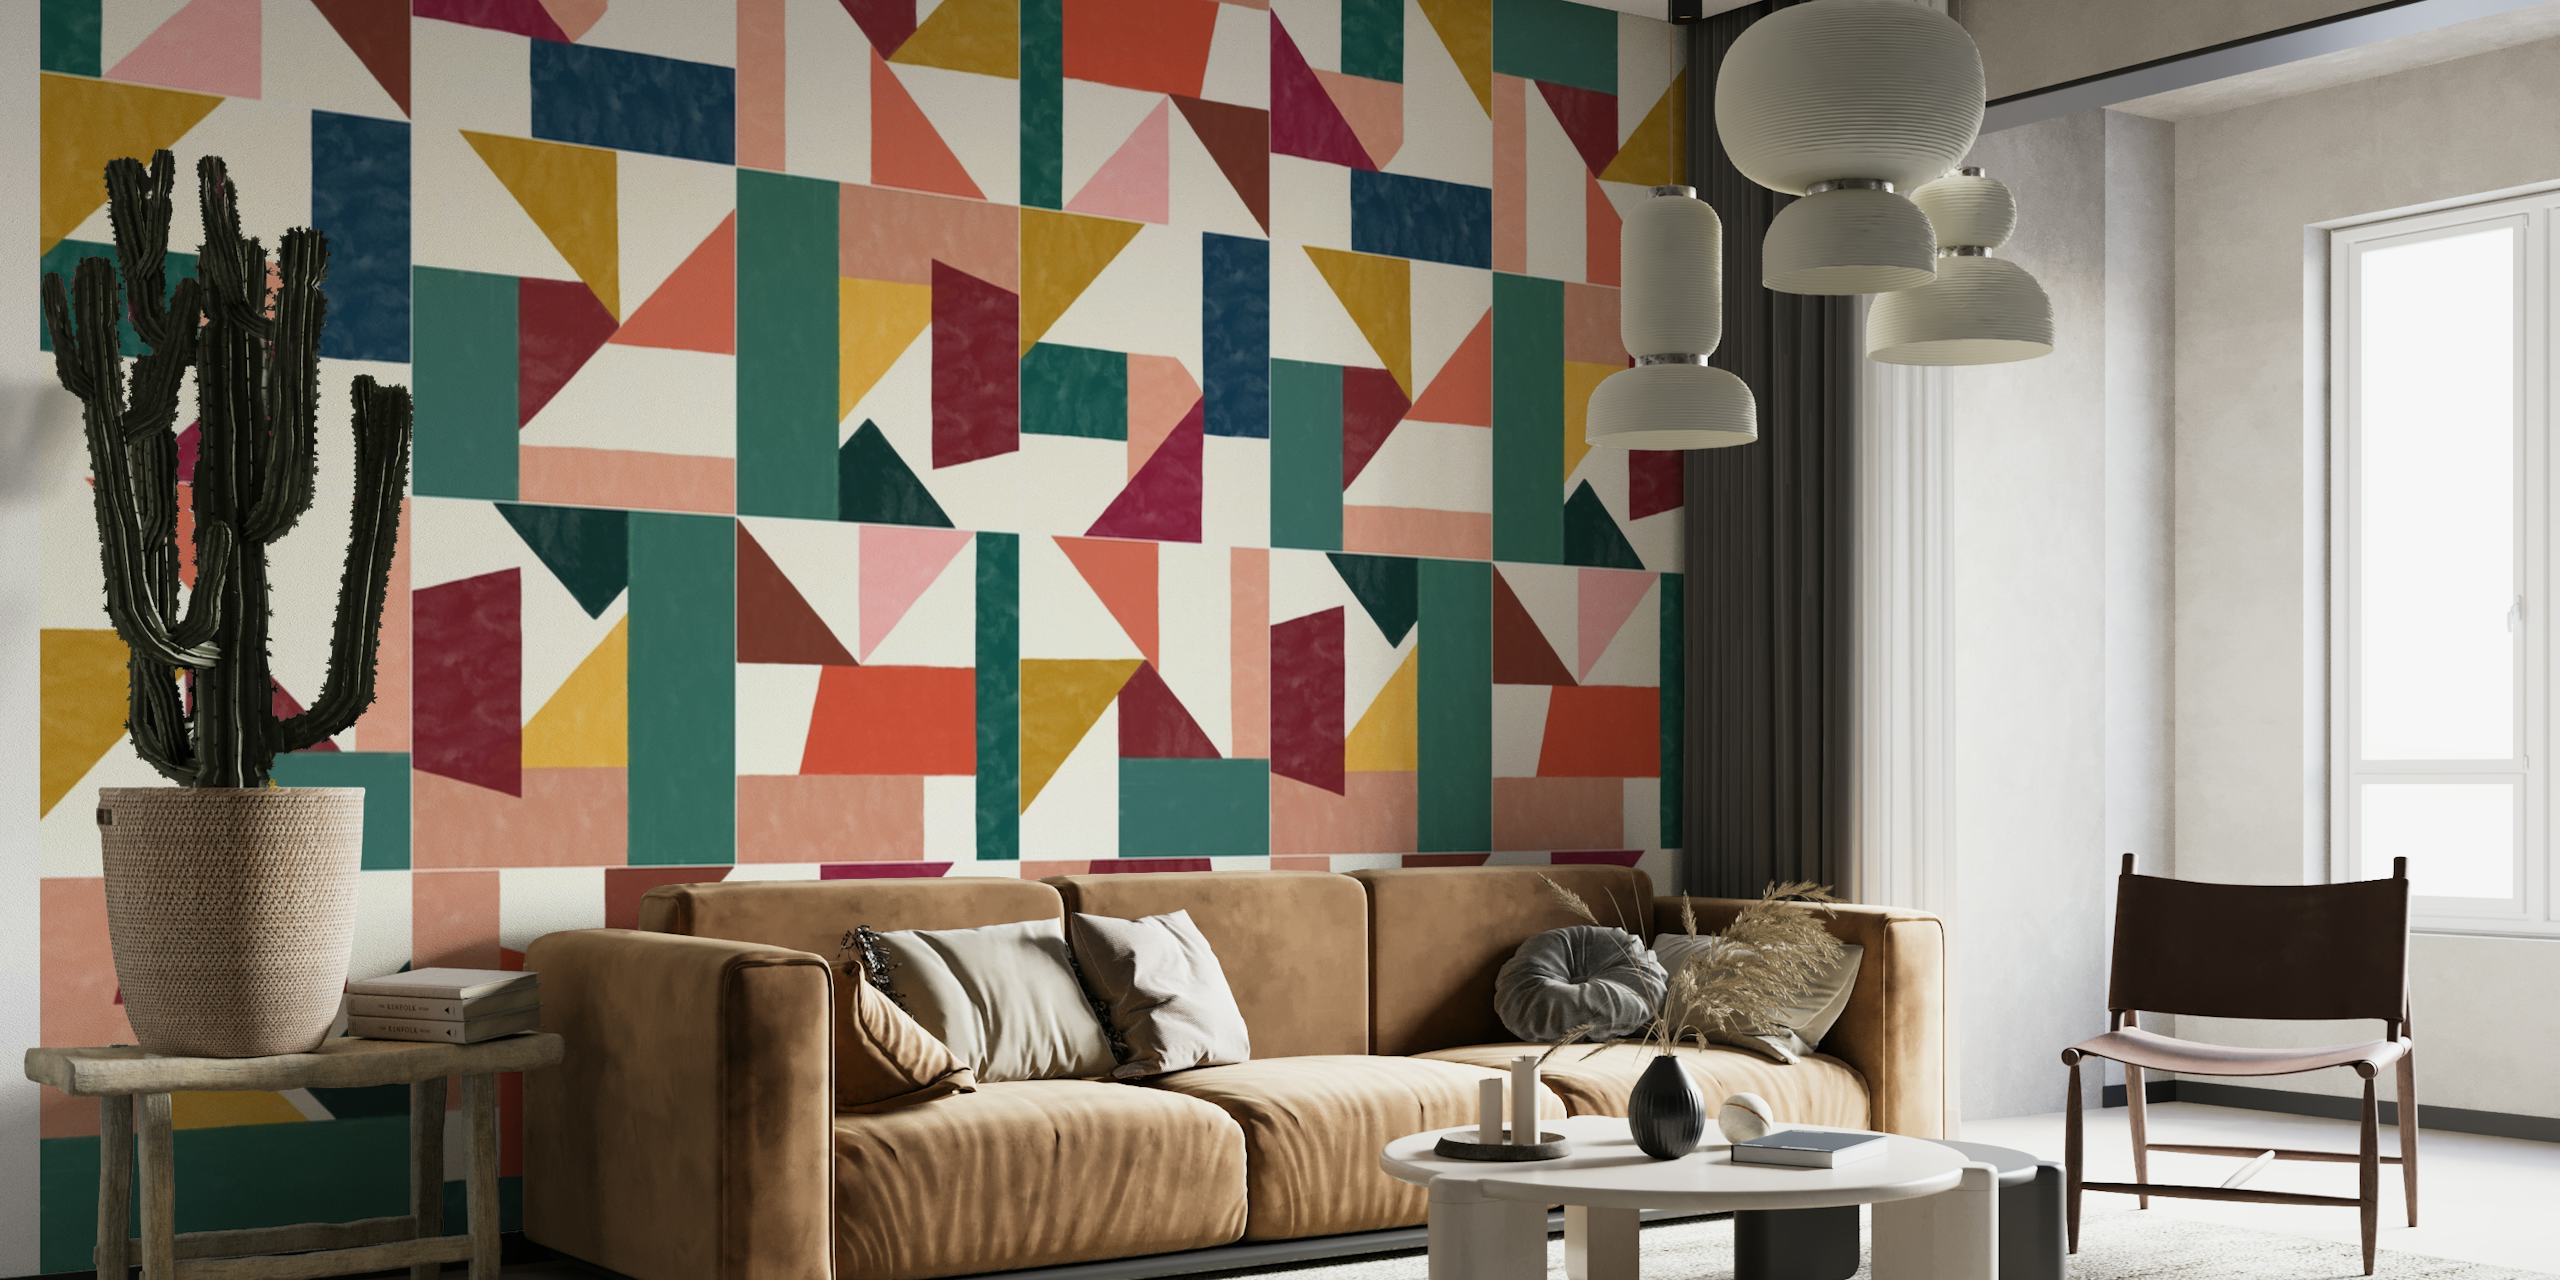 Tangram Wall Tiles One ταπετσαρία